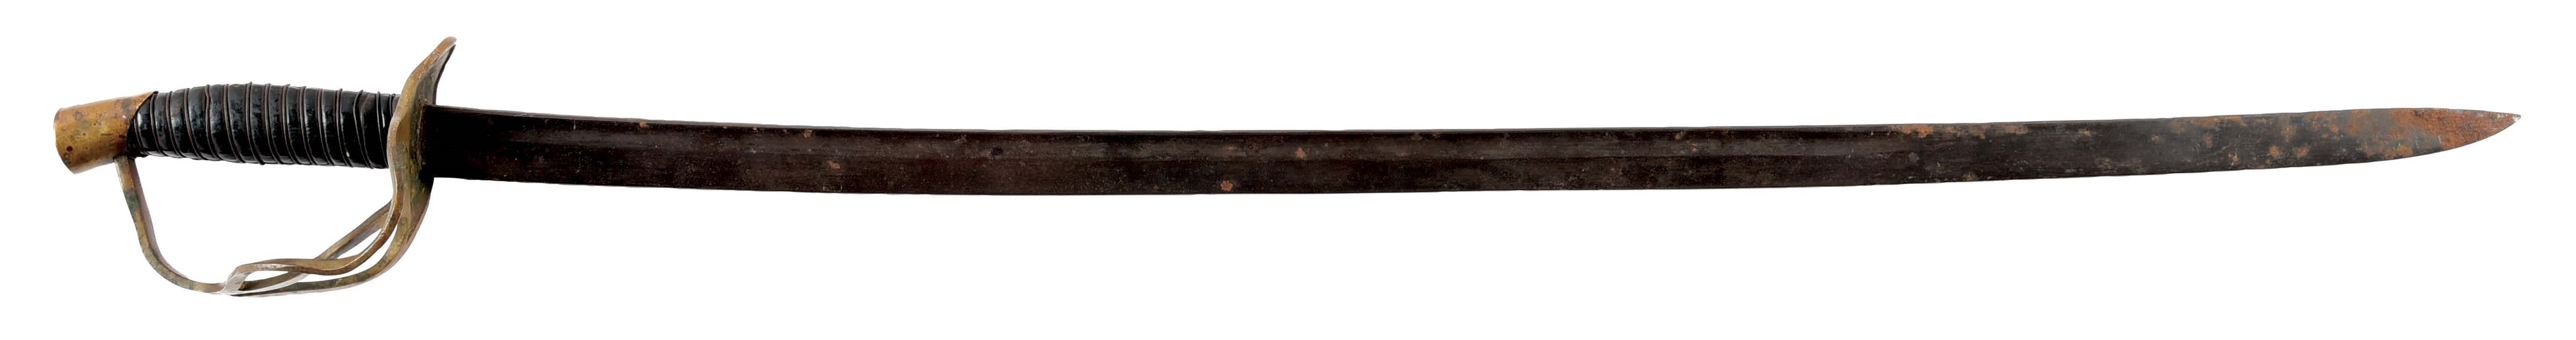 CONFEDERATE STATES ARMORY CAVALRY SABER.